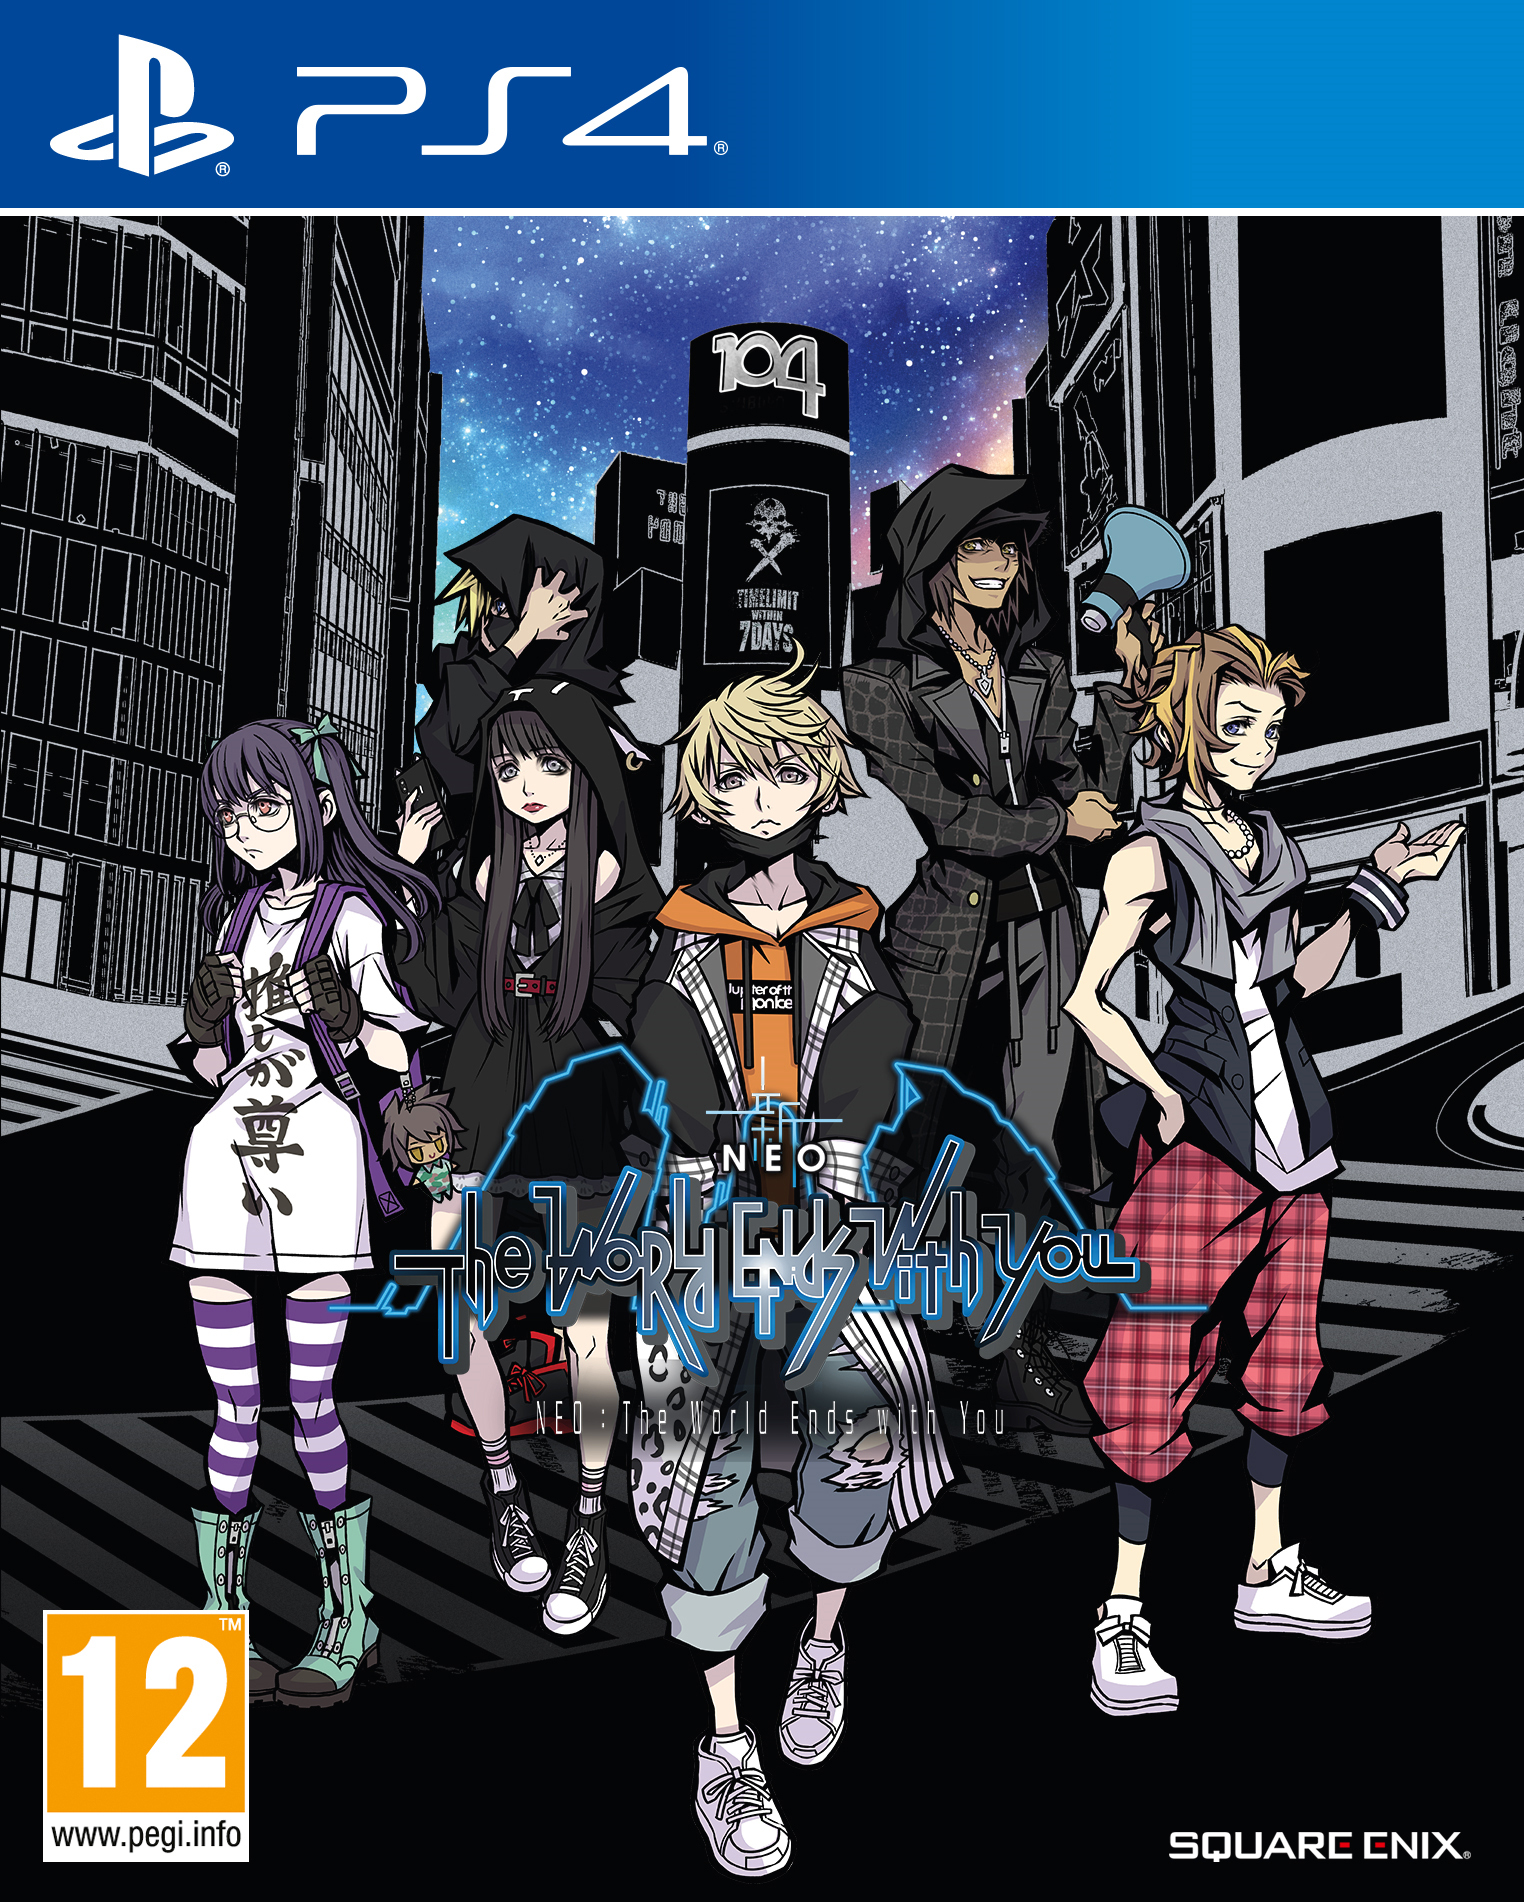 Nintendo NEO: The World Ends With You PlayStation 4